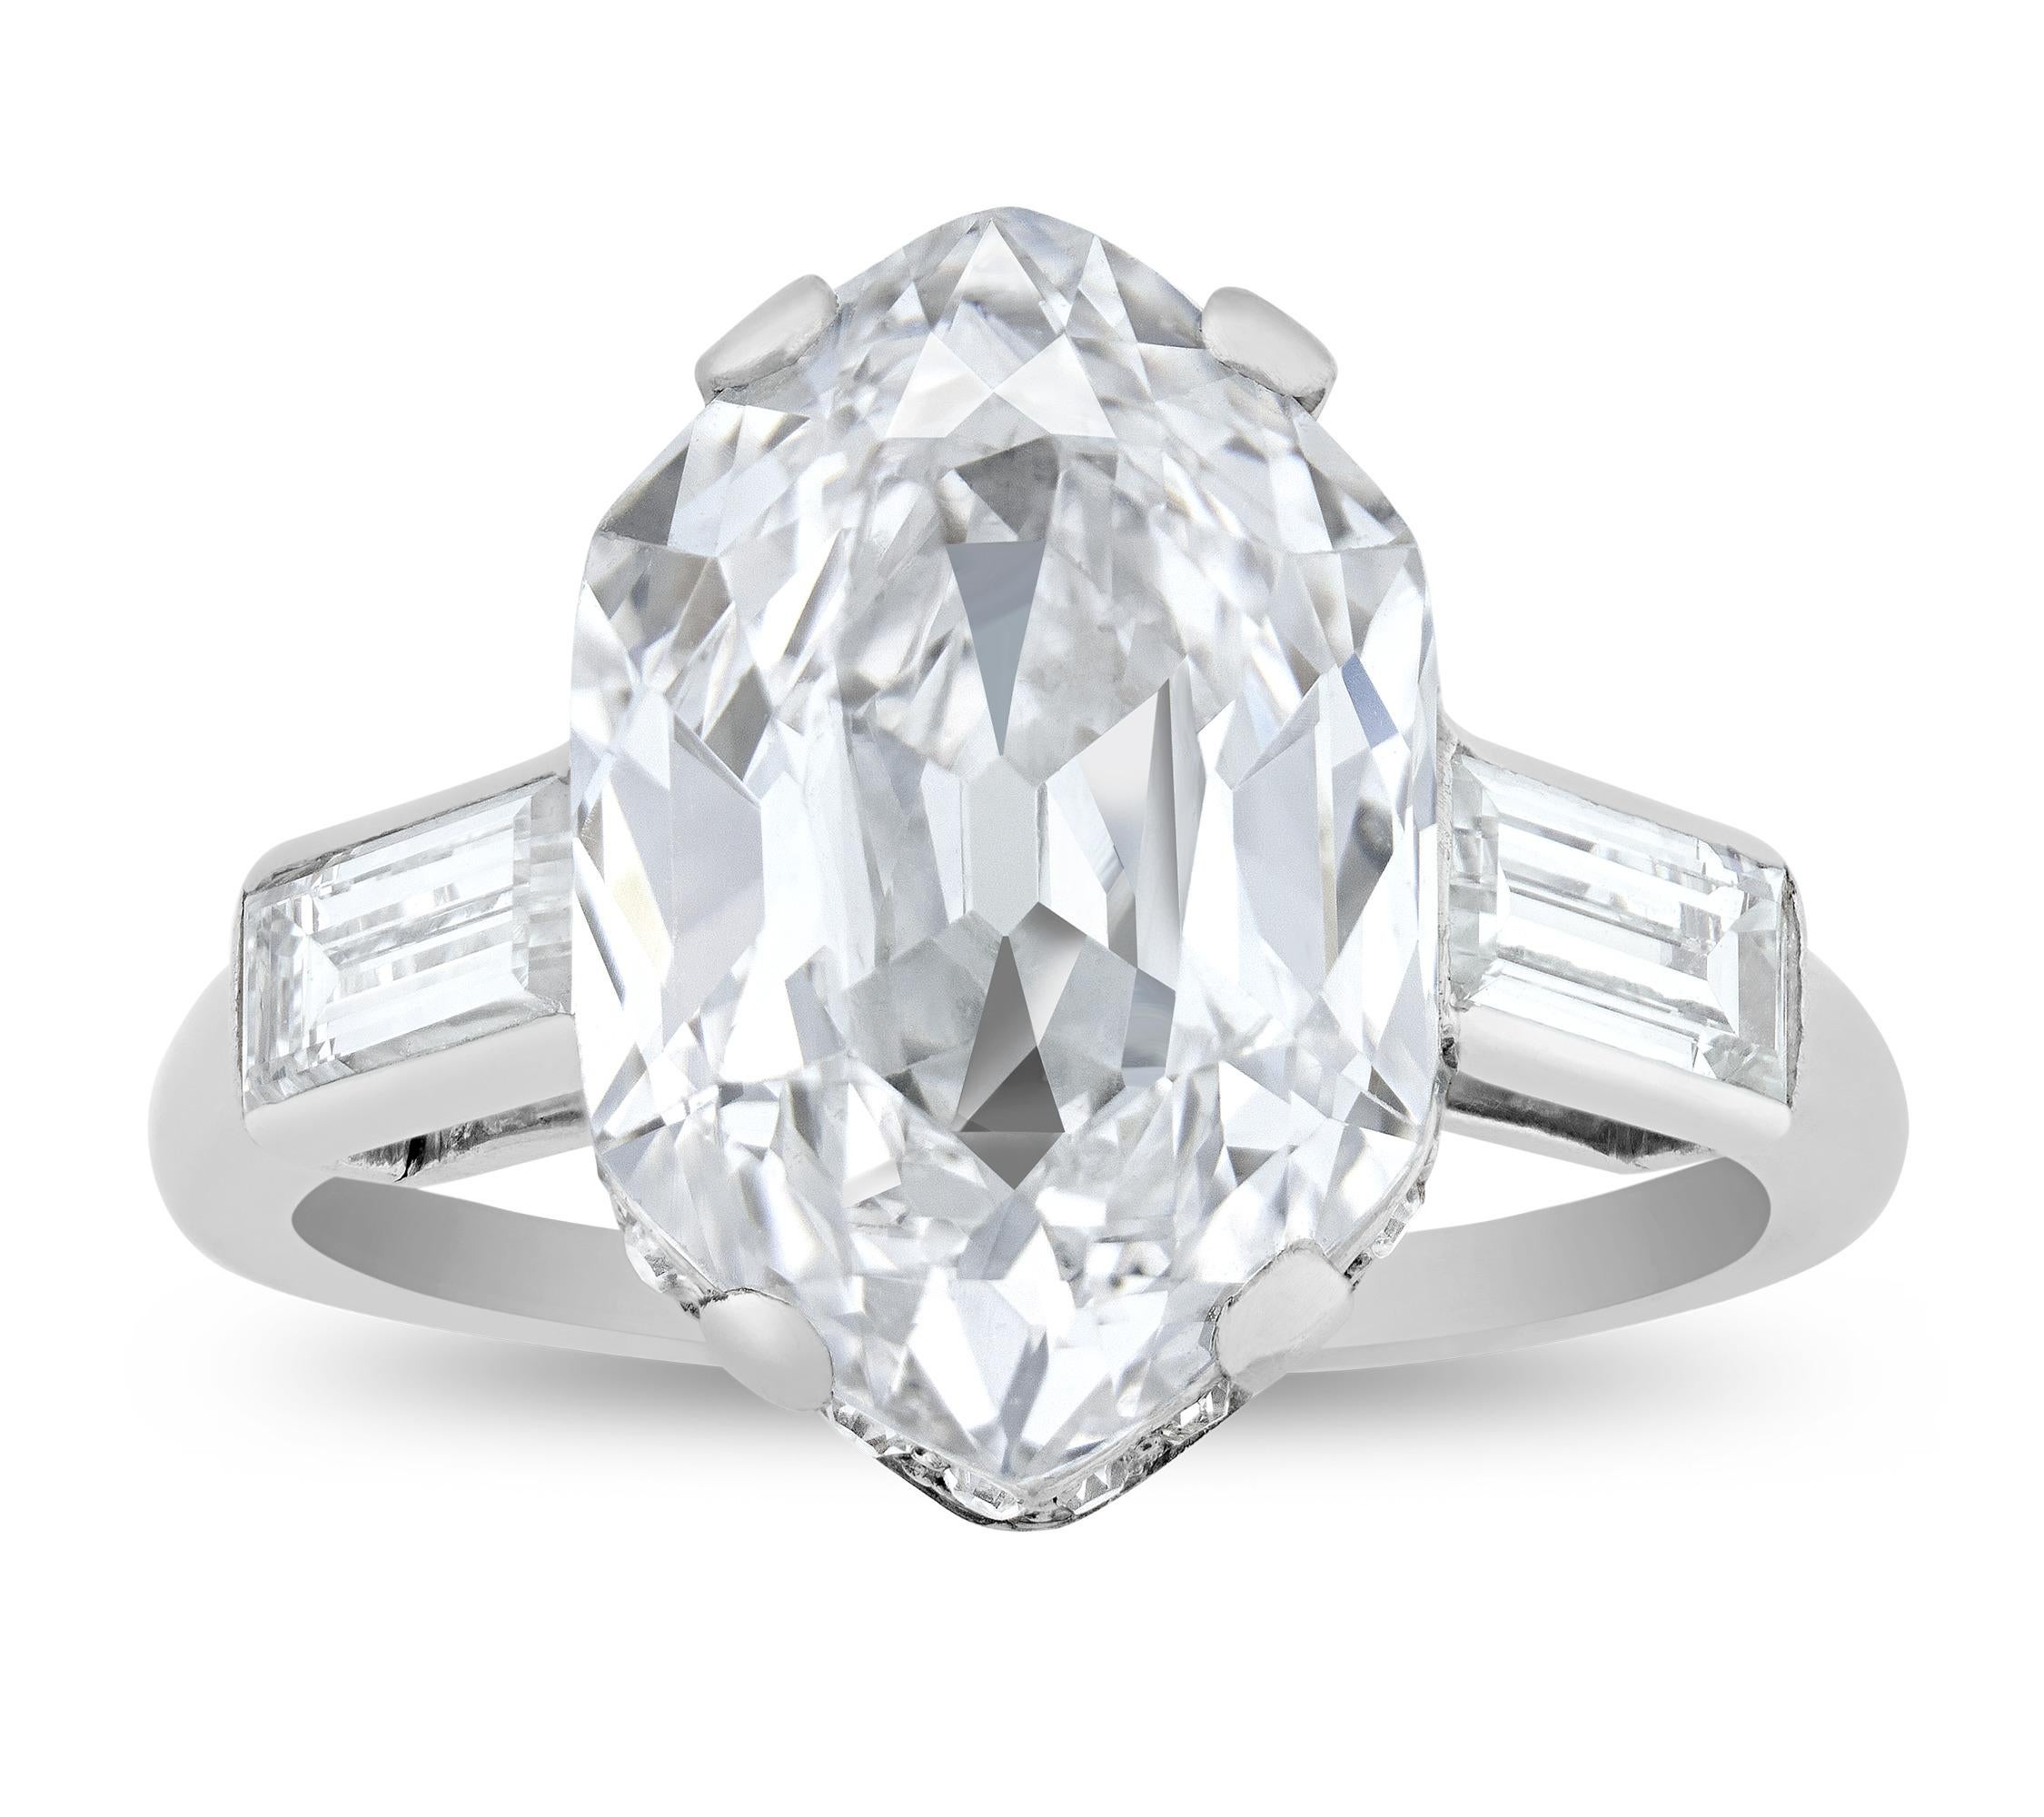 Spectacular color, clarity and rarity distinguish the 4.33-carat diamond in this Art Deco-period ring by famed jeweler Cartier. Unique for its hexagonal shape, the diamond is certified by the Gemological Institute of America as a type IIa diamond,